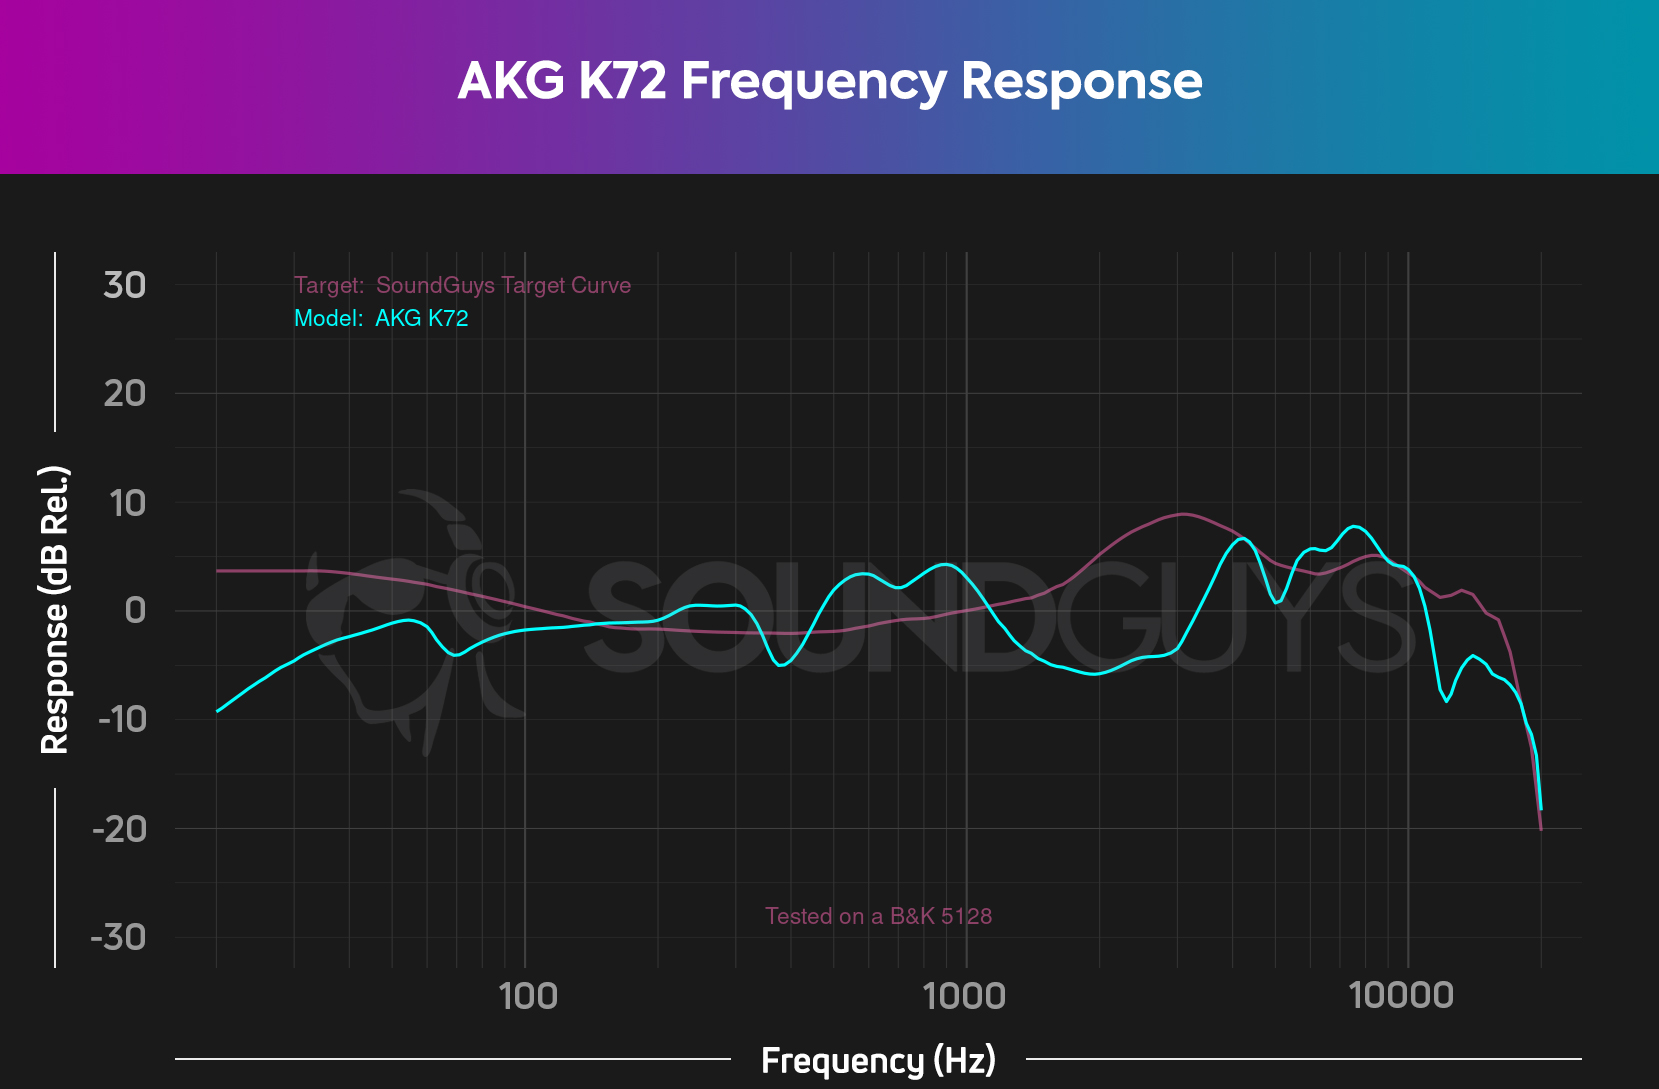 This chart shows our target frequency response compared to the AKG K72 results.